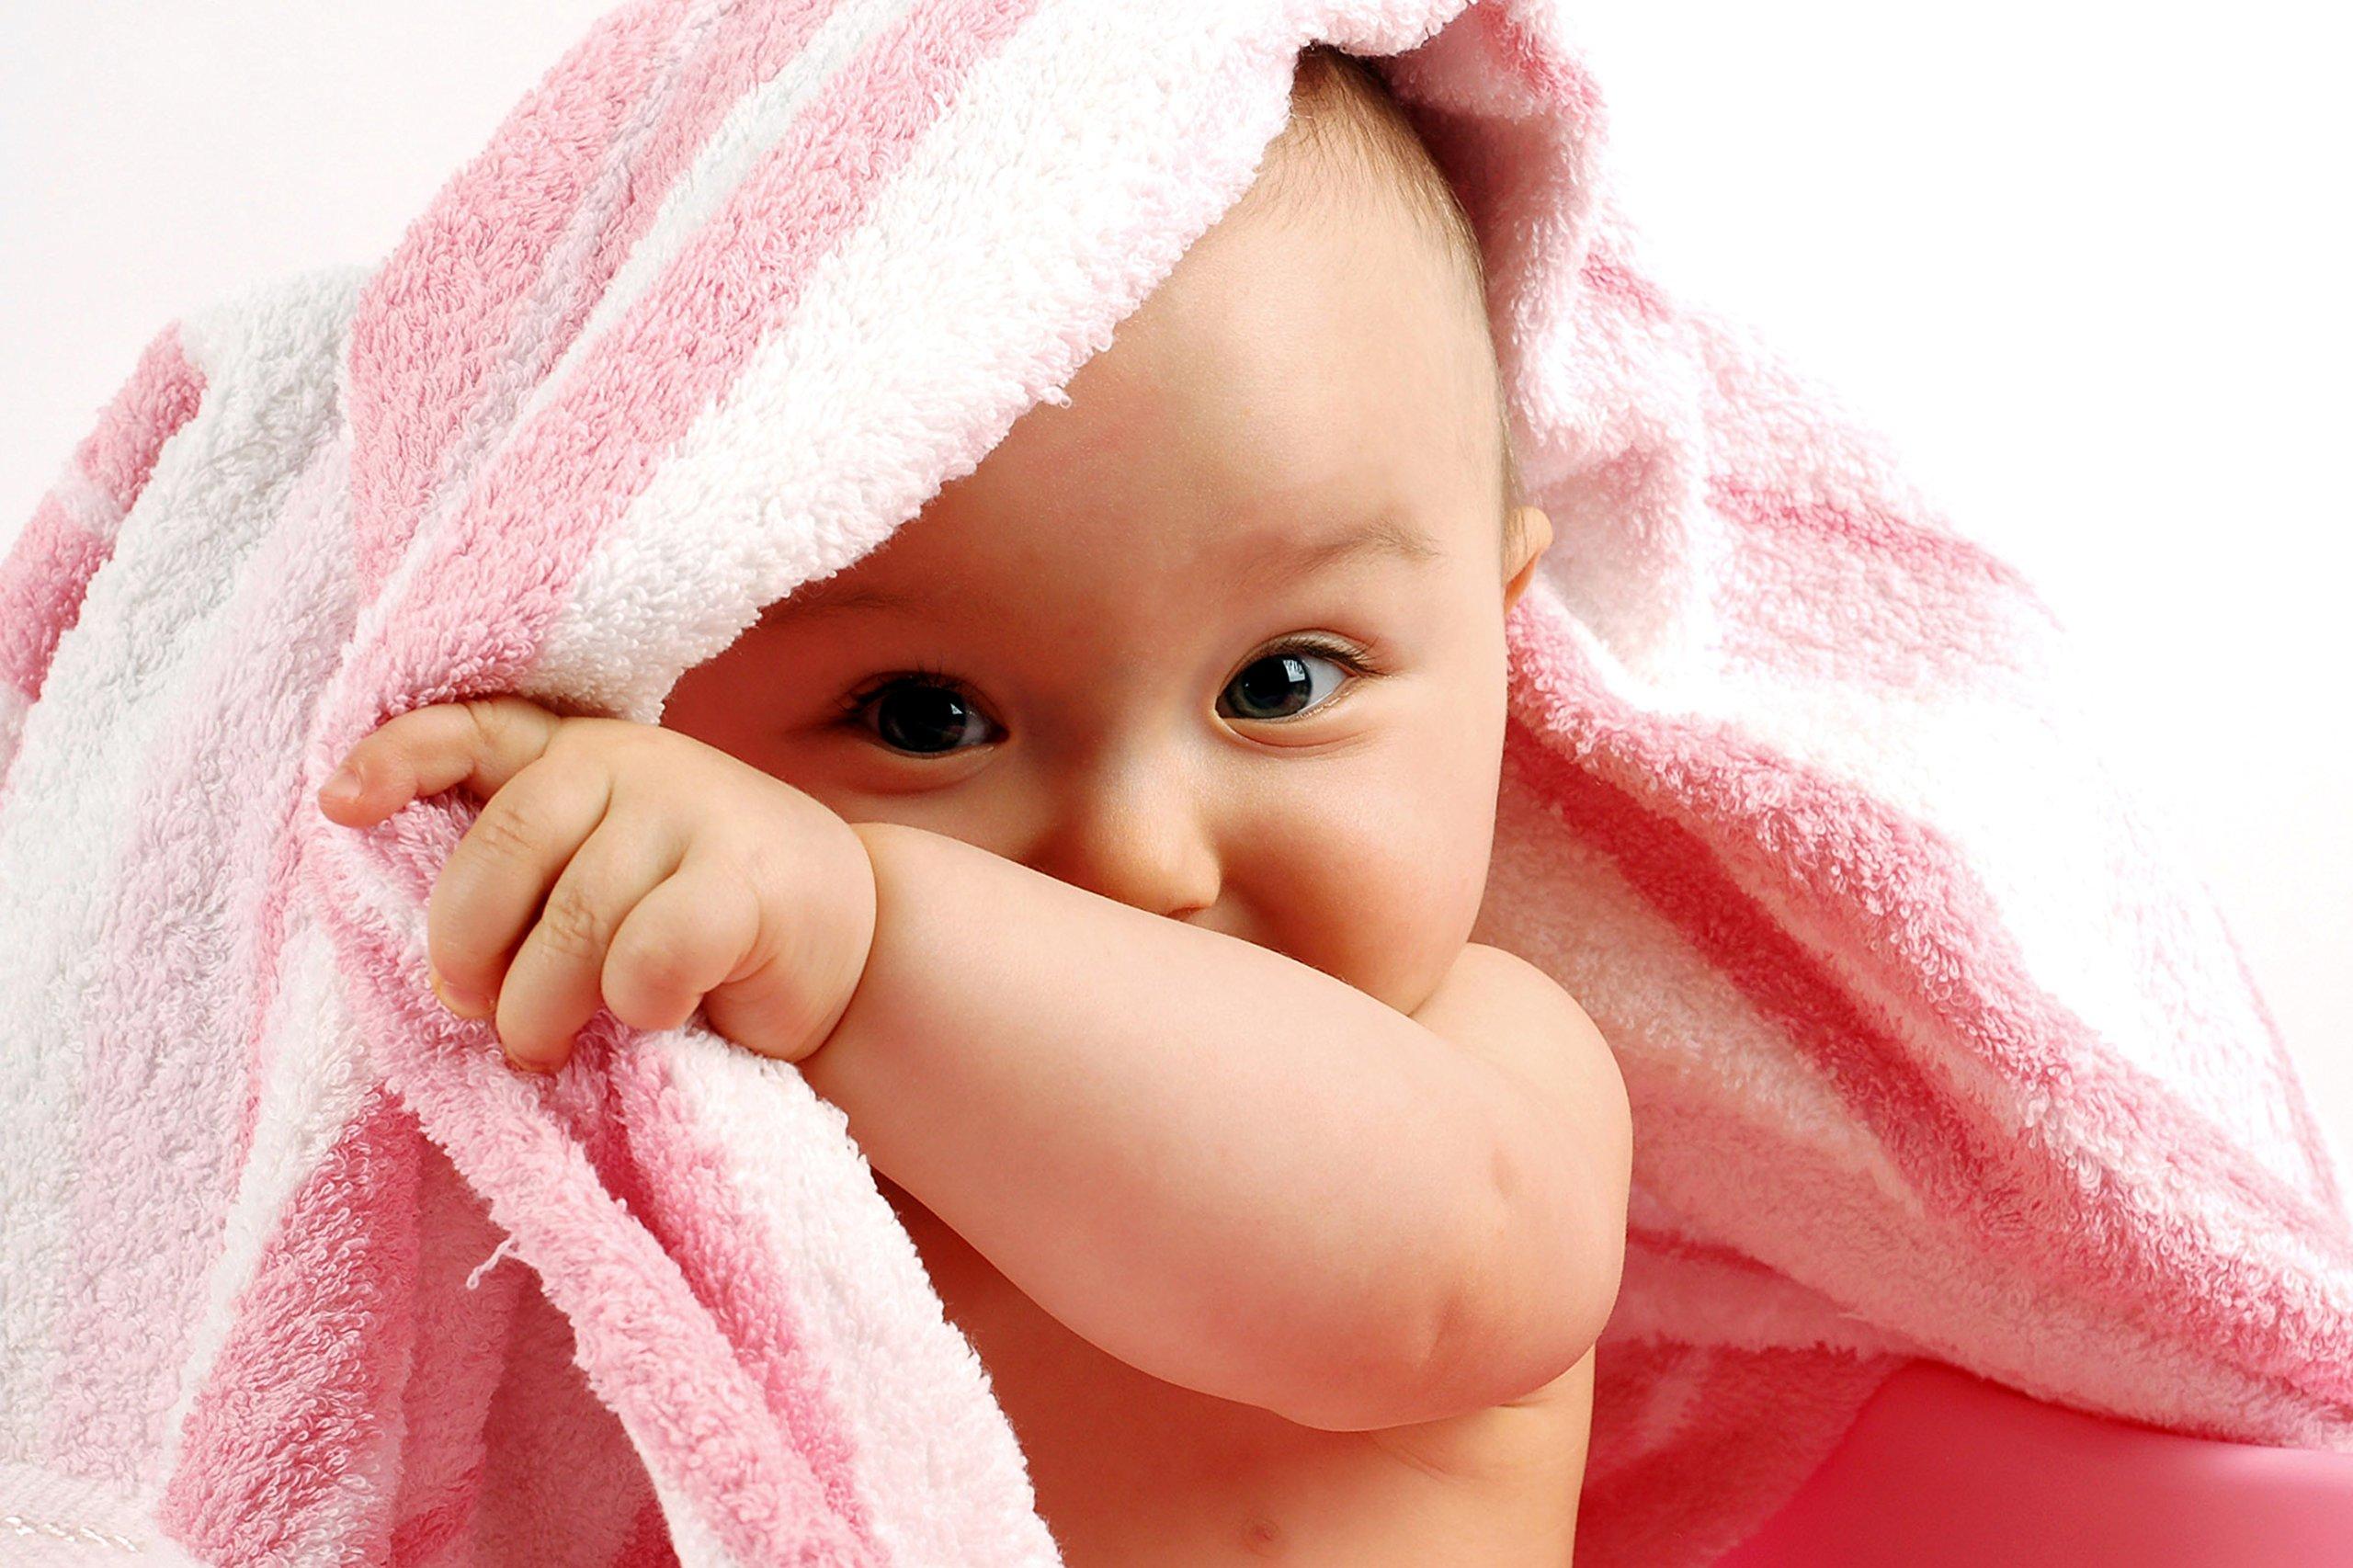 Oshi Child Love Cute Baby Playing With Pink Towel Poster